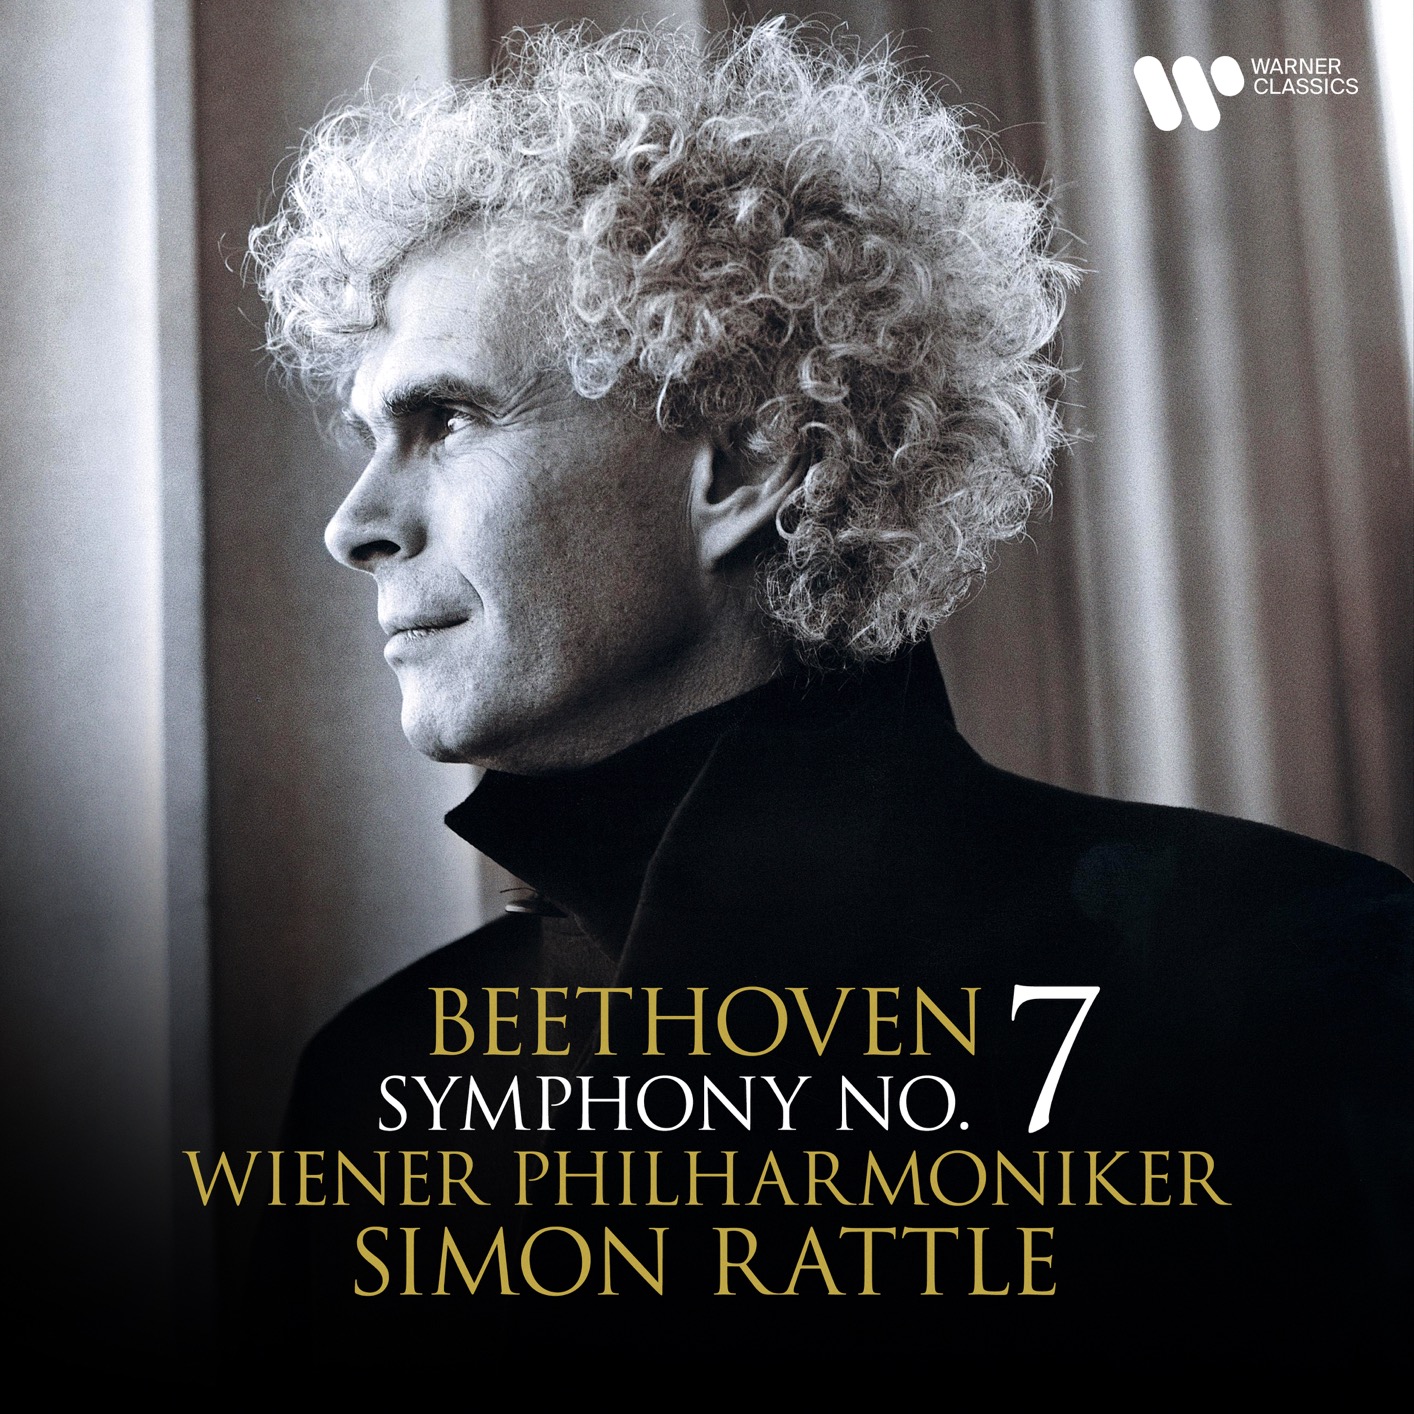 Wiener Philharmonic Orchestra & Simon Rattle – Beethoven: Symphony No. 7, Op. 92 (Remastered) (2021) [FLAC 24bit/44,1kHz]